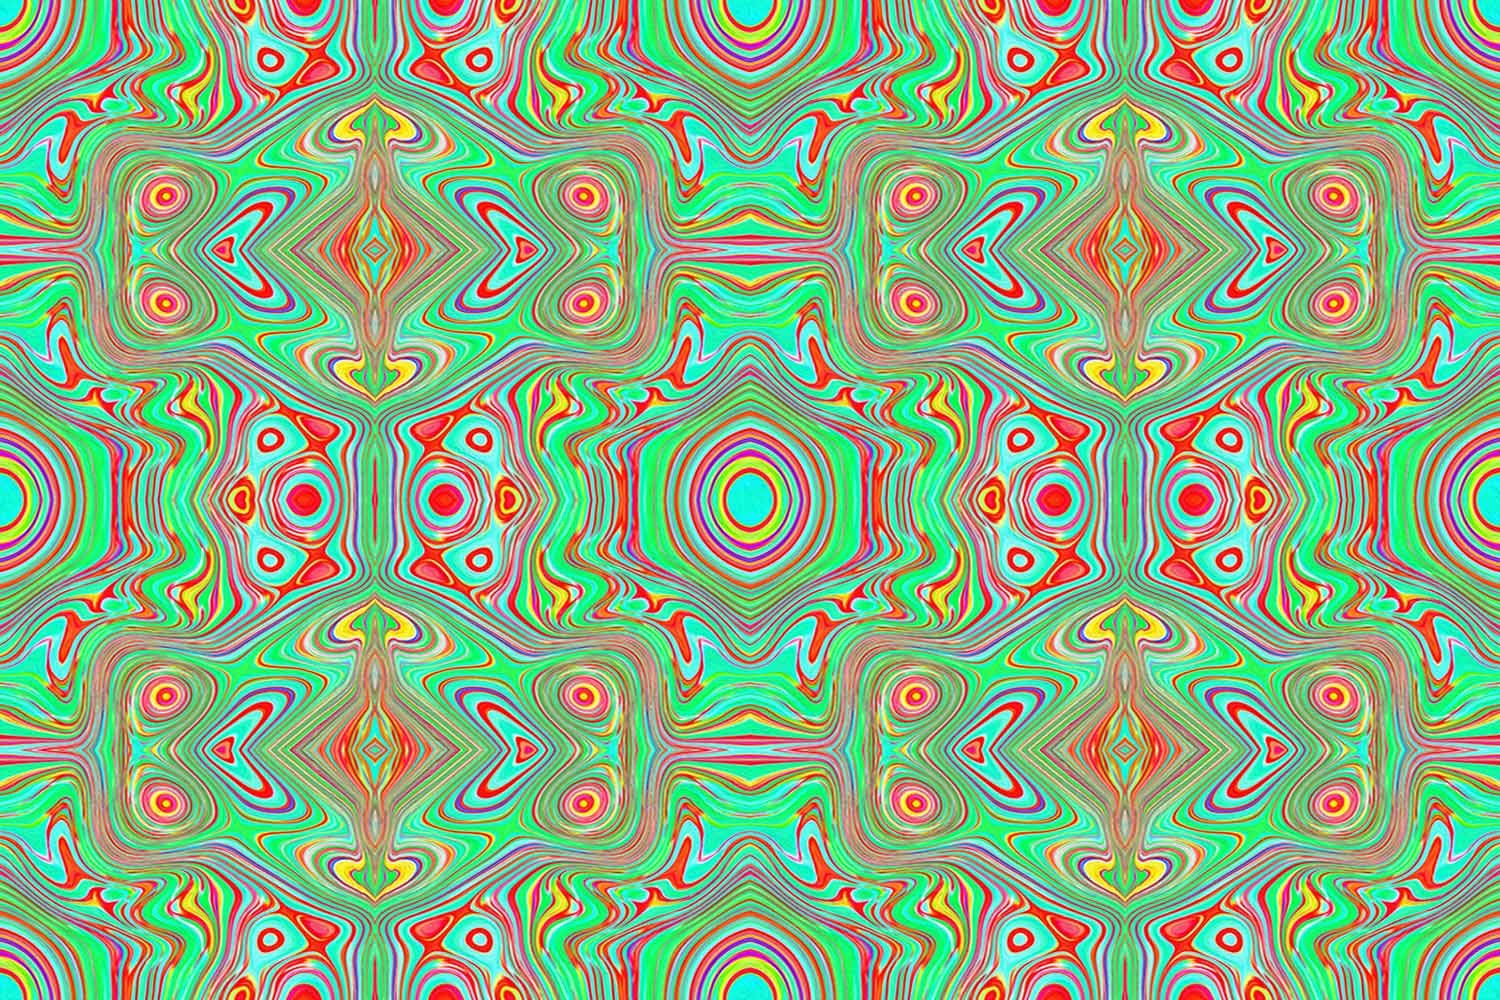 Trippy Retro Orange and Lime Green Abstract Pattern